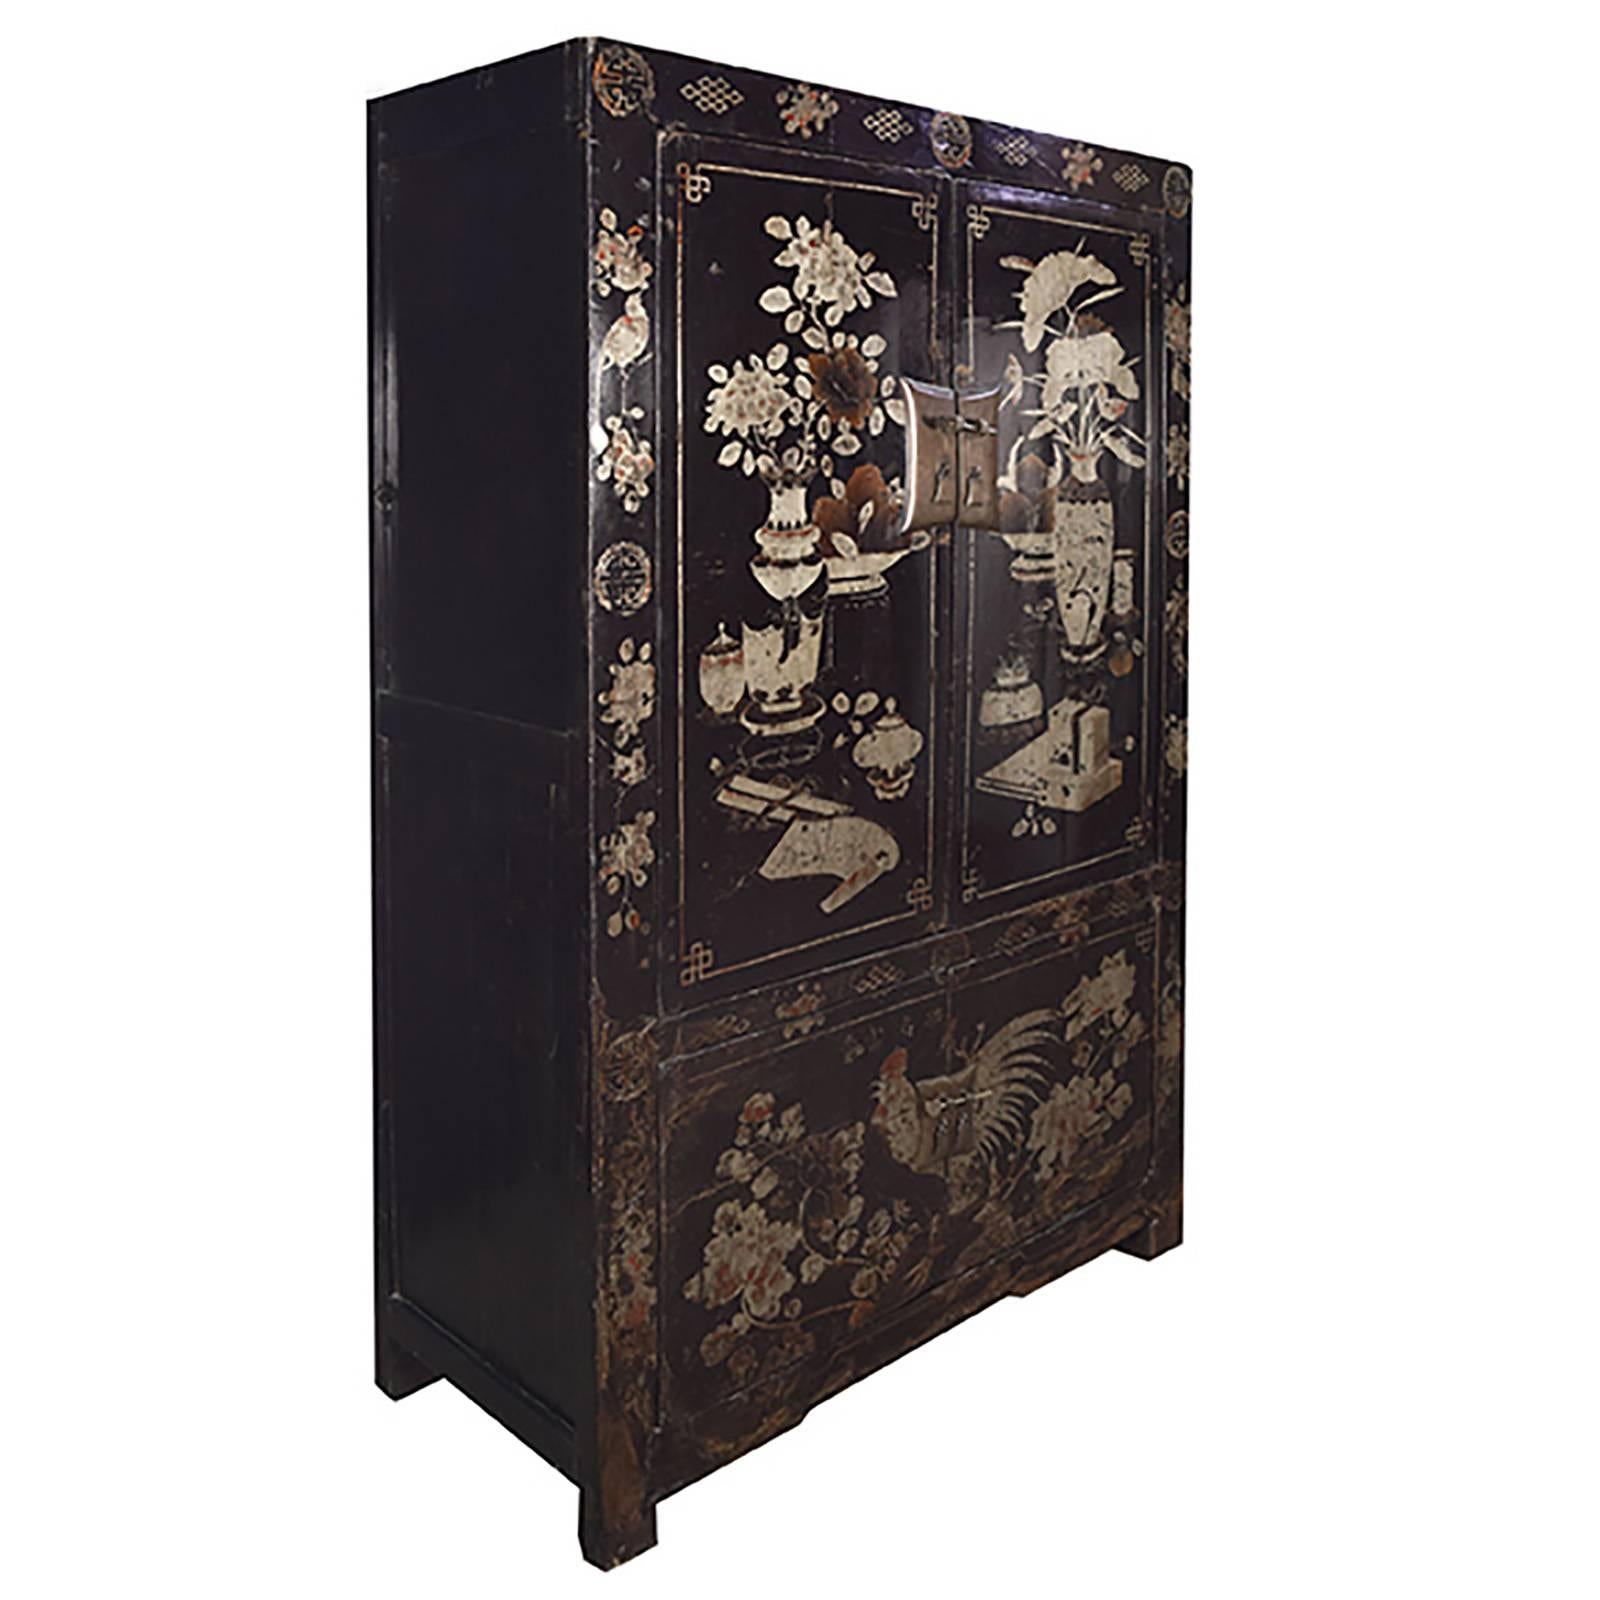 Featuring a rooster on its lower doors, this extravagantly decorated 19th century cabinet was likely commissioned at the time by someone born in the year of the rooster. Standing out against the cabinet’s richly lacquered black surface, the profuse